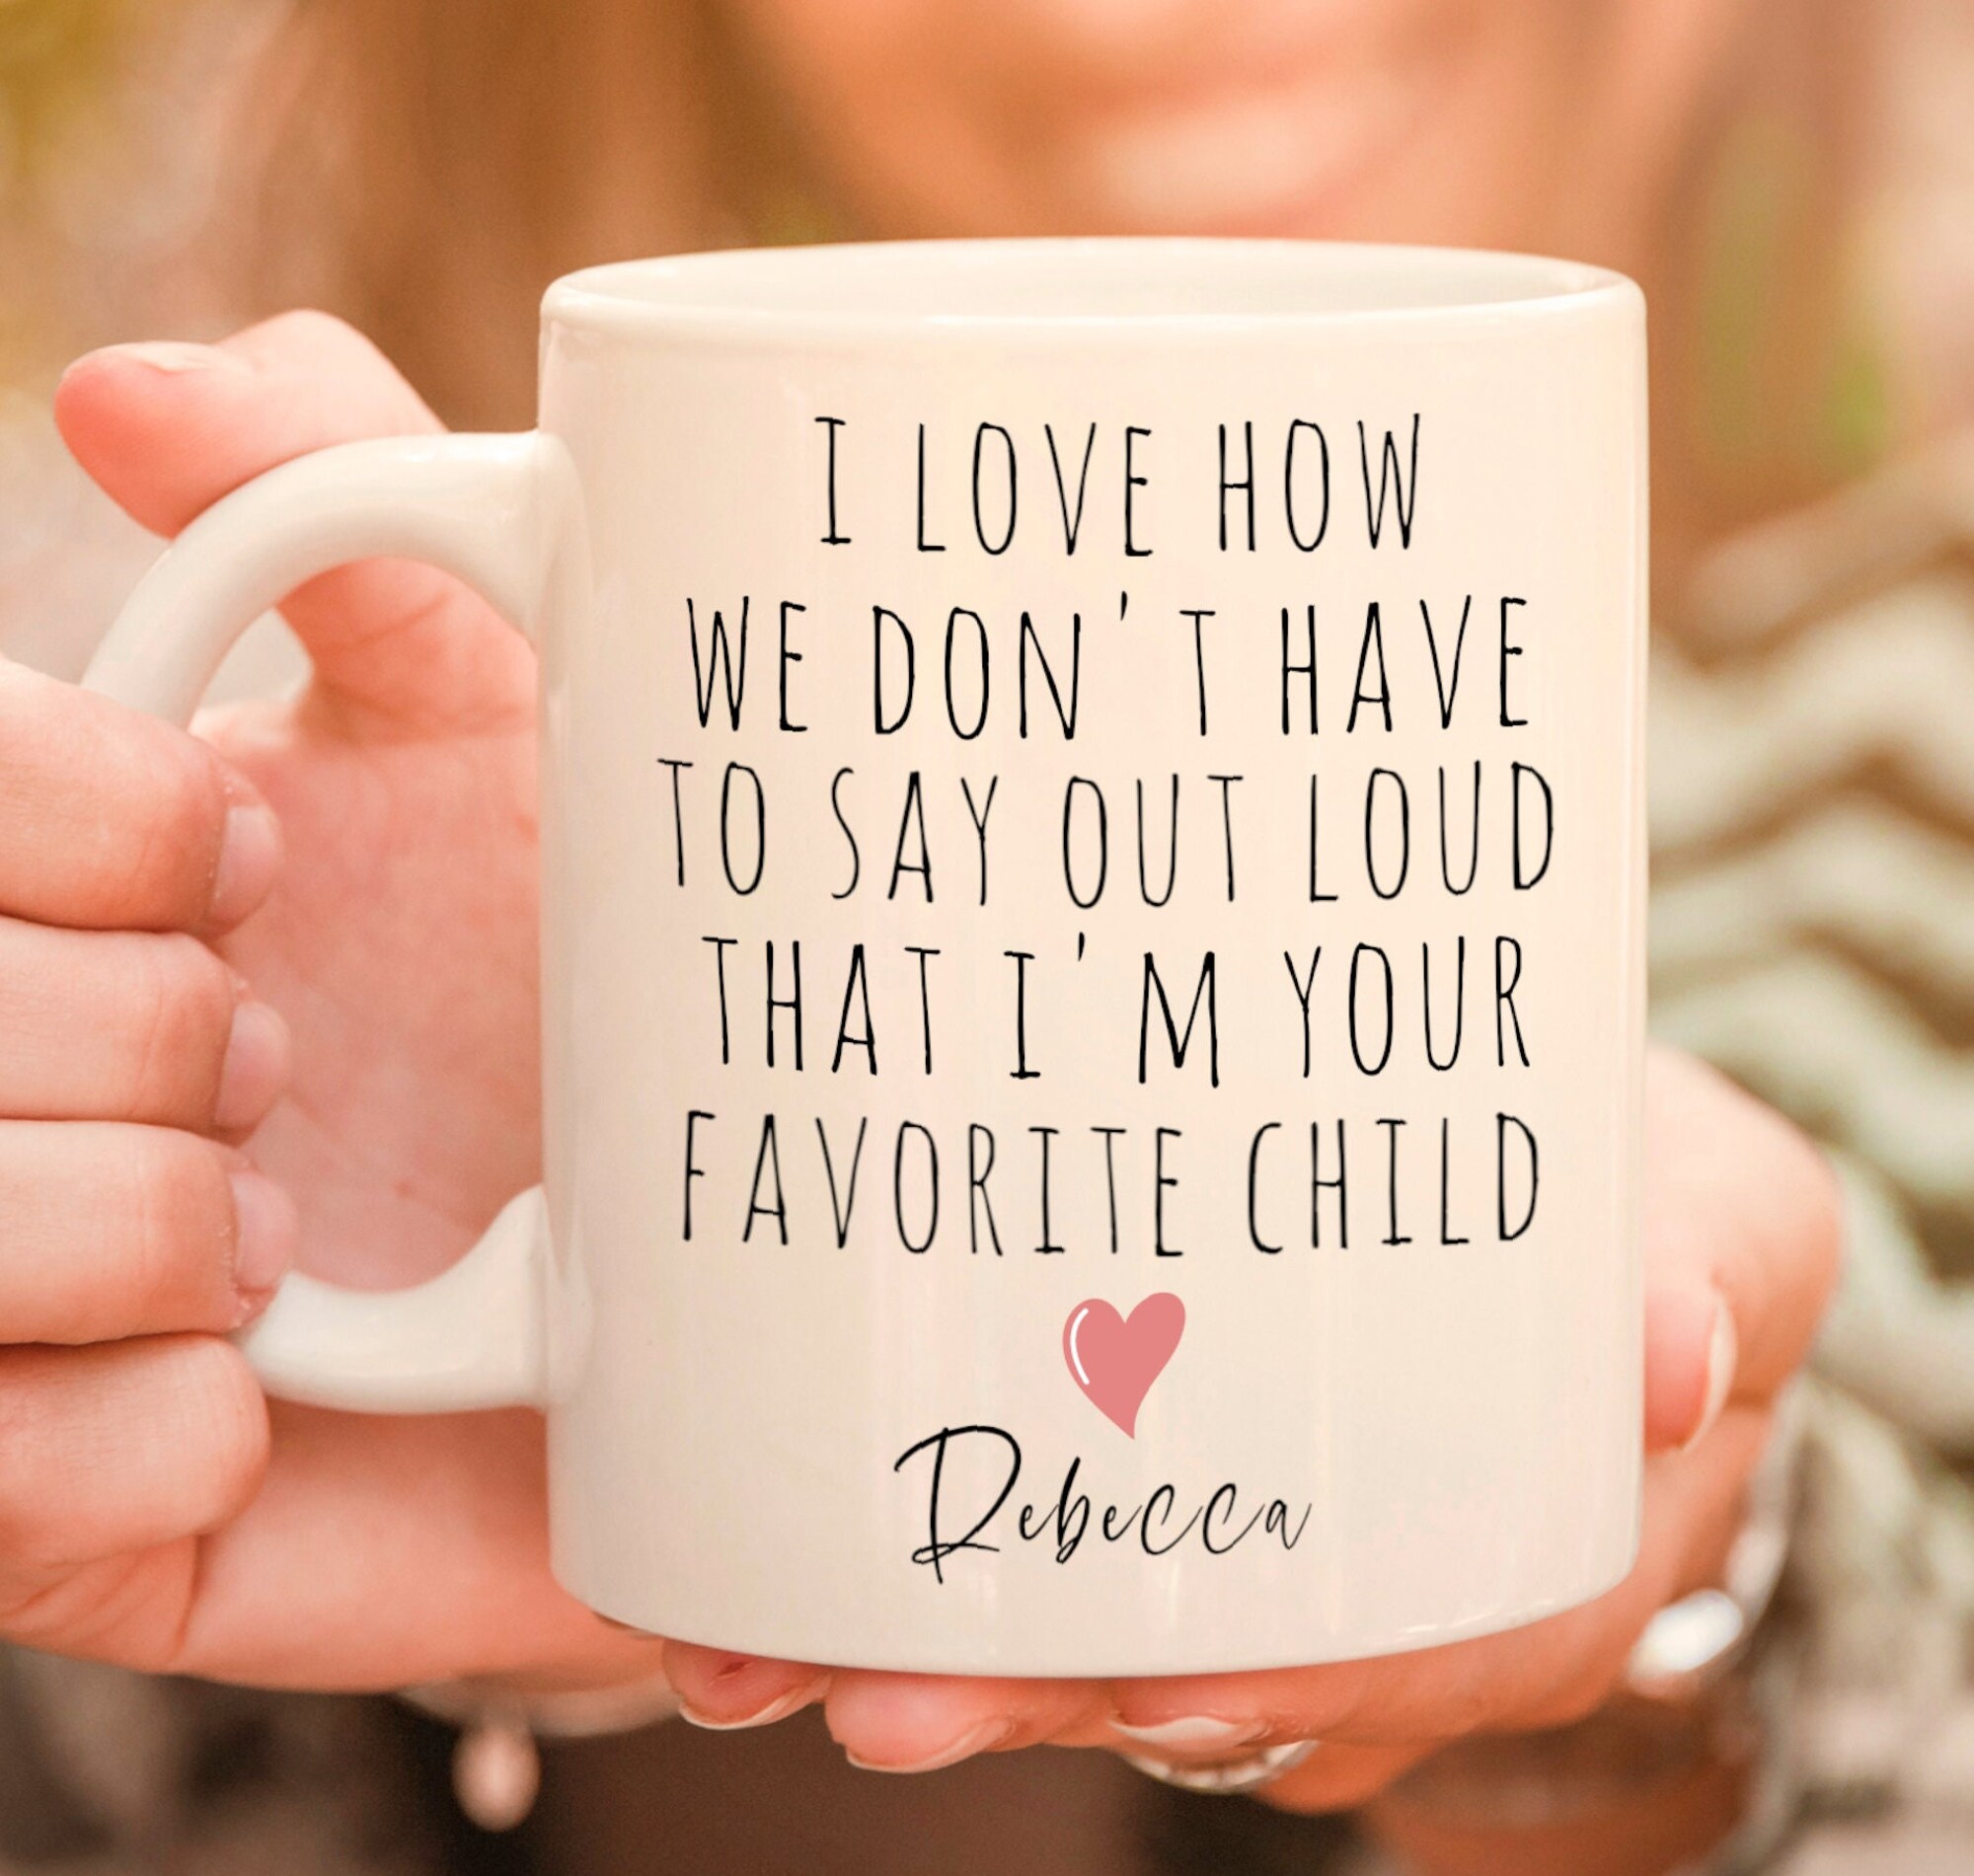 Discover I Love How We Don't Have To Say Out Loud That I'm Your Favorite Child Mug